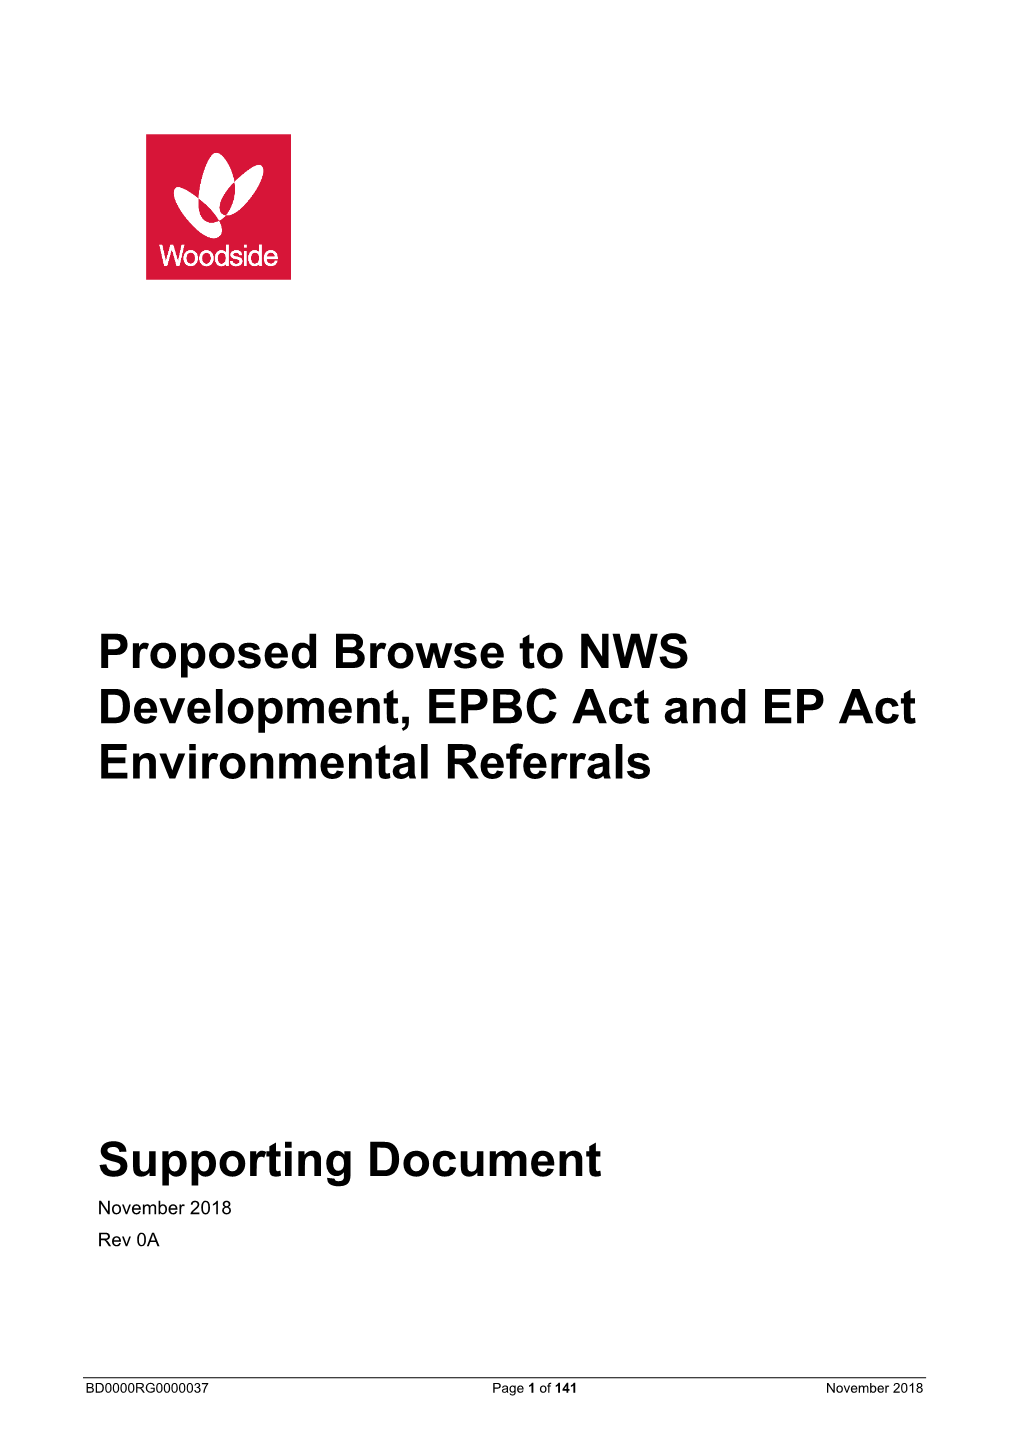 Browse to NWS Development EPBC Act and EP Act Environmental